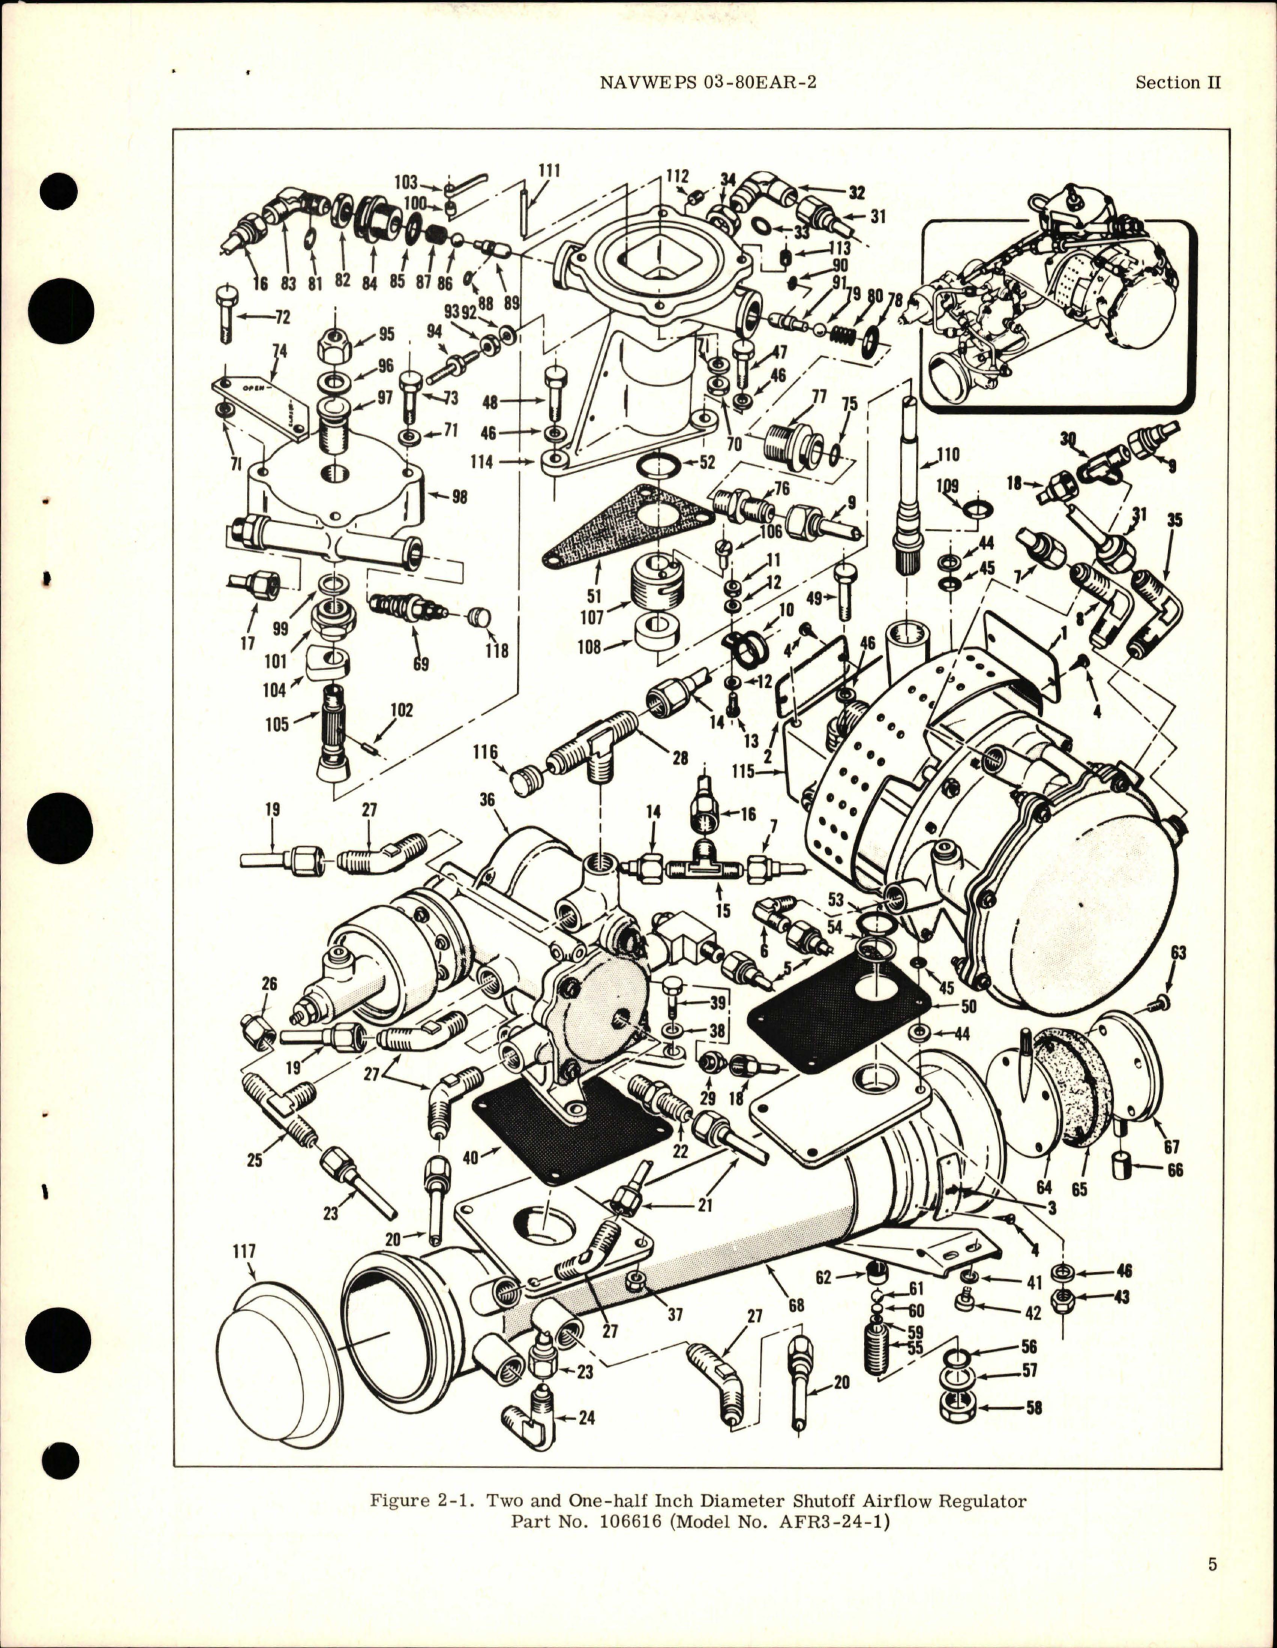 Sample page 9 from AirCorps Library document: Overhaul Instructions for Two and One-Half Inch Diameter Shutoff Airflow Regulator - Part 106616